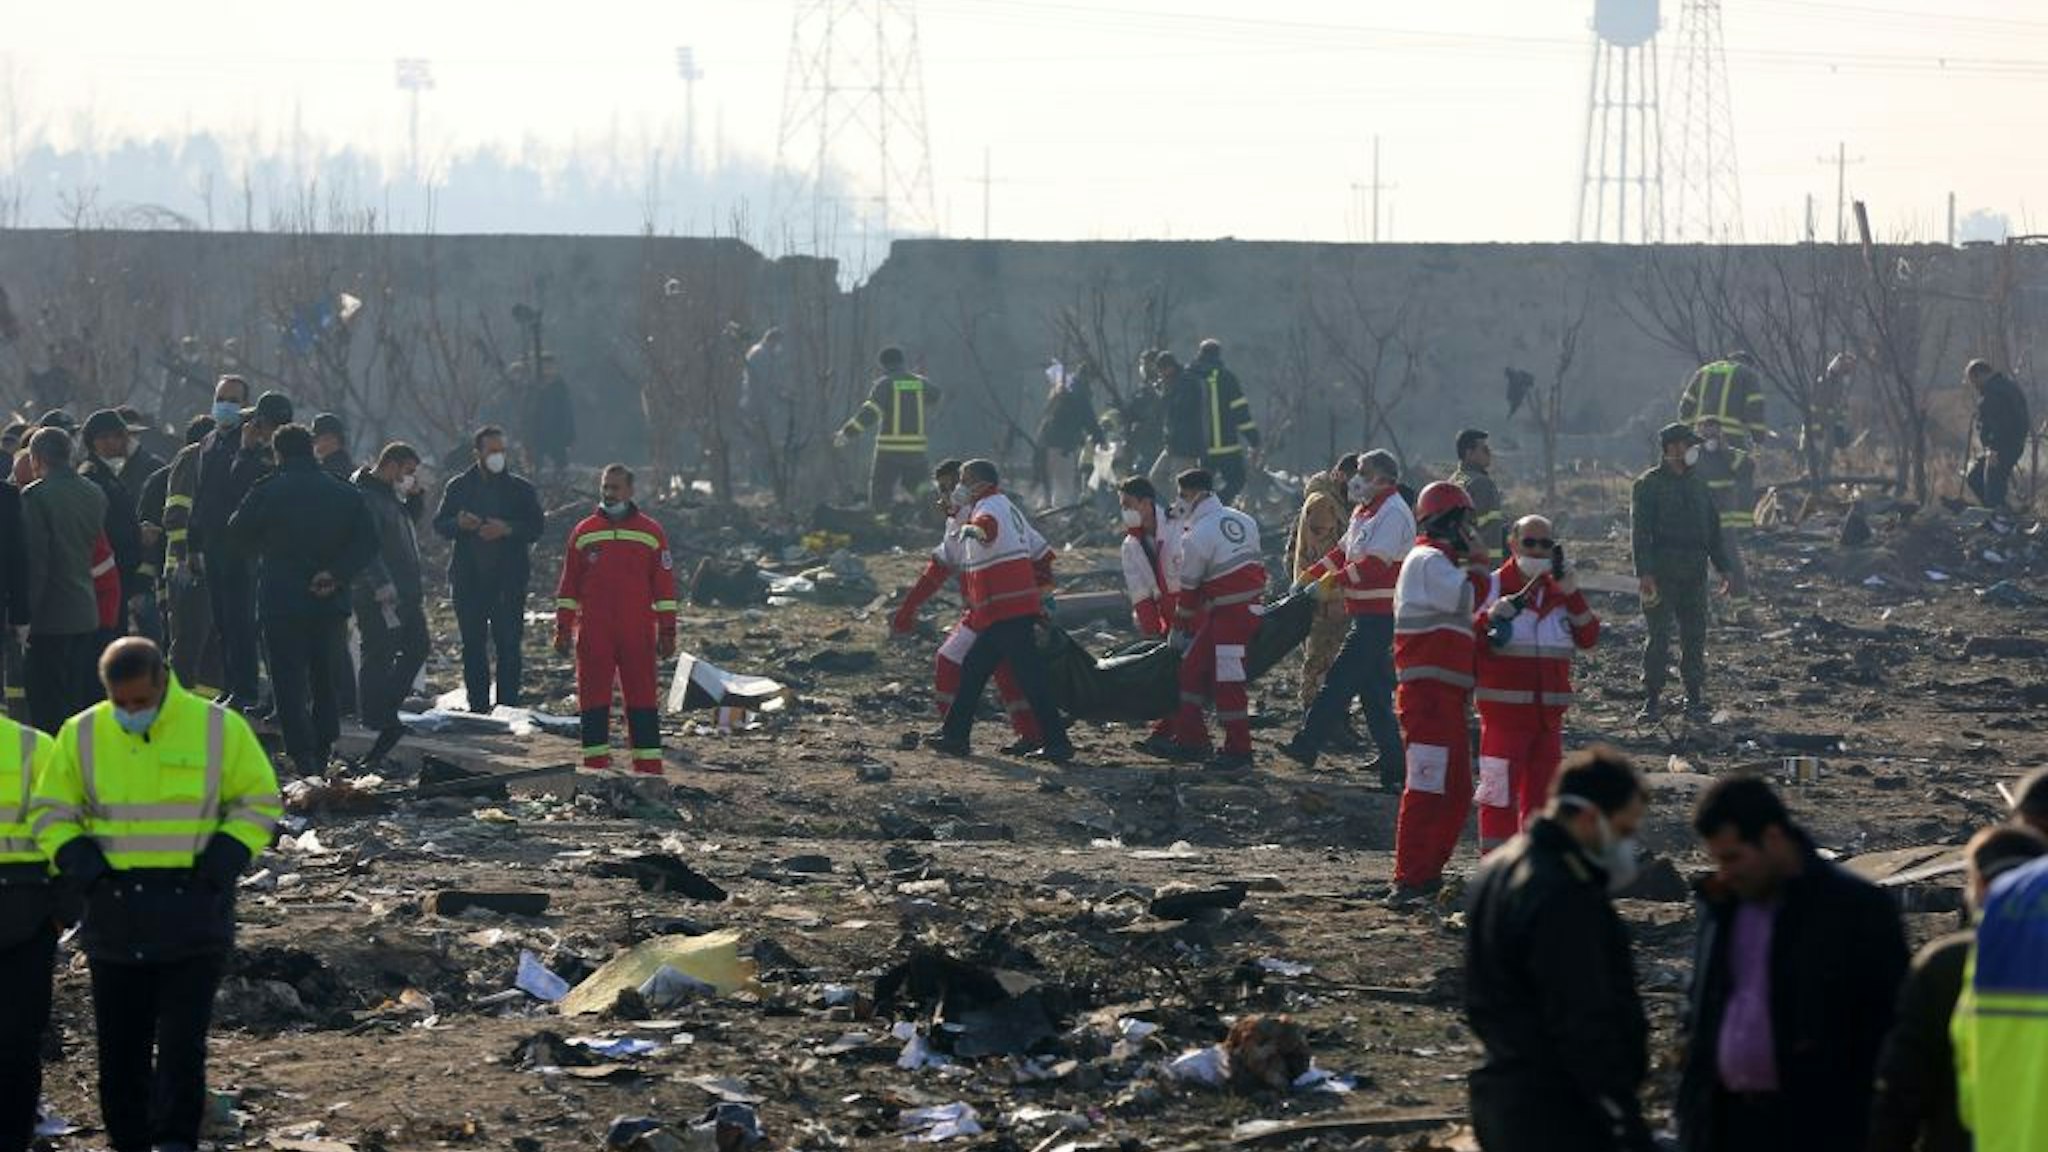 TEHRAN, IRAN - JANUARY 08: Search and rescue works are conducted at site after a Boeing 737 plane belonging to a Ukrainian airline crashed near Imam Khomeini Airport in Iran just after takeoff with 180 passengers on board in Tehran, Iran on January 08, 2020. All 167 passengers and nine crew members on an Ukrainian 737 plane that crashed near Iran's capital Tehran early Wednesday have died, according to a state official.